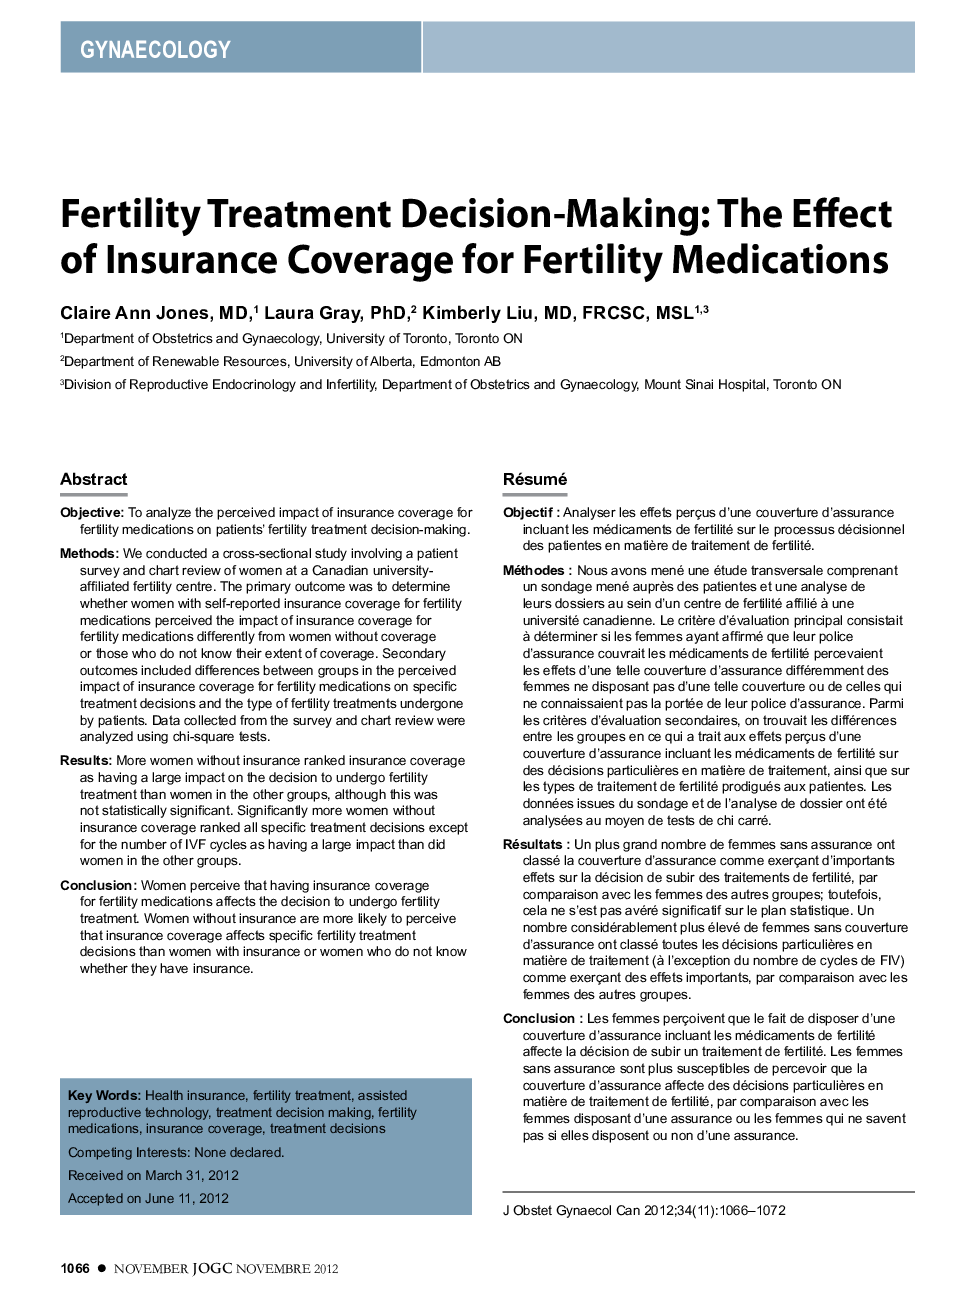 Fertility Treatment Decision-Making: The Effect of Insurance Coverage for Fertility Medications